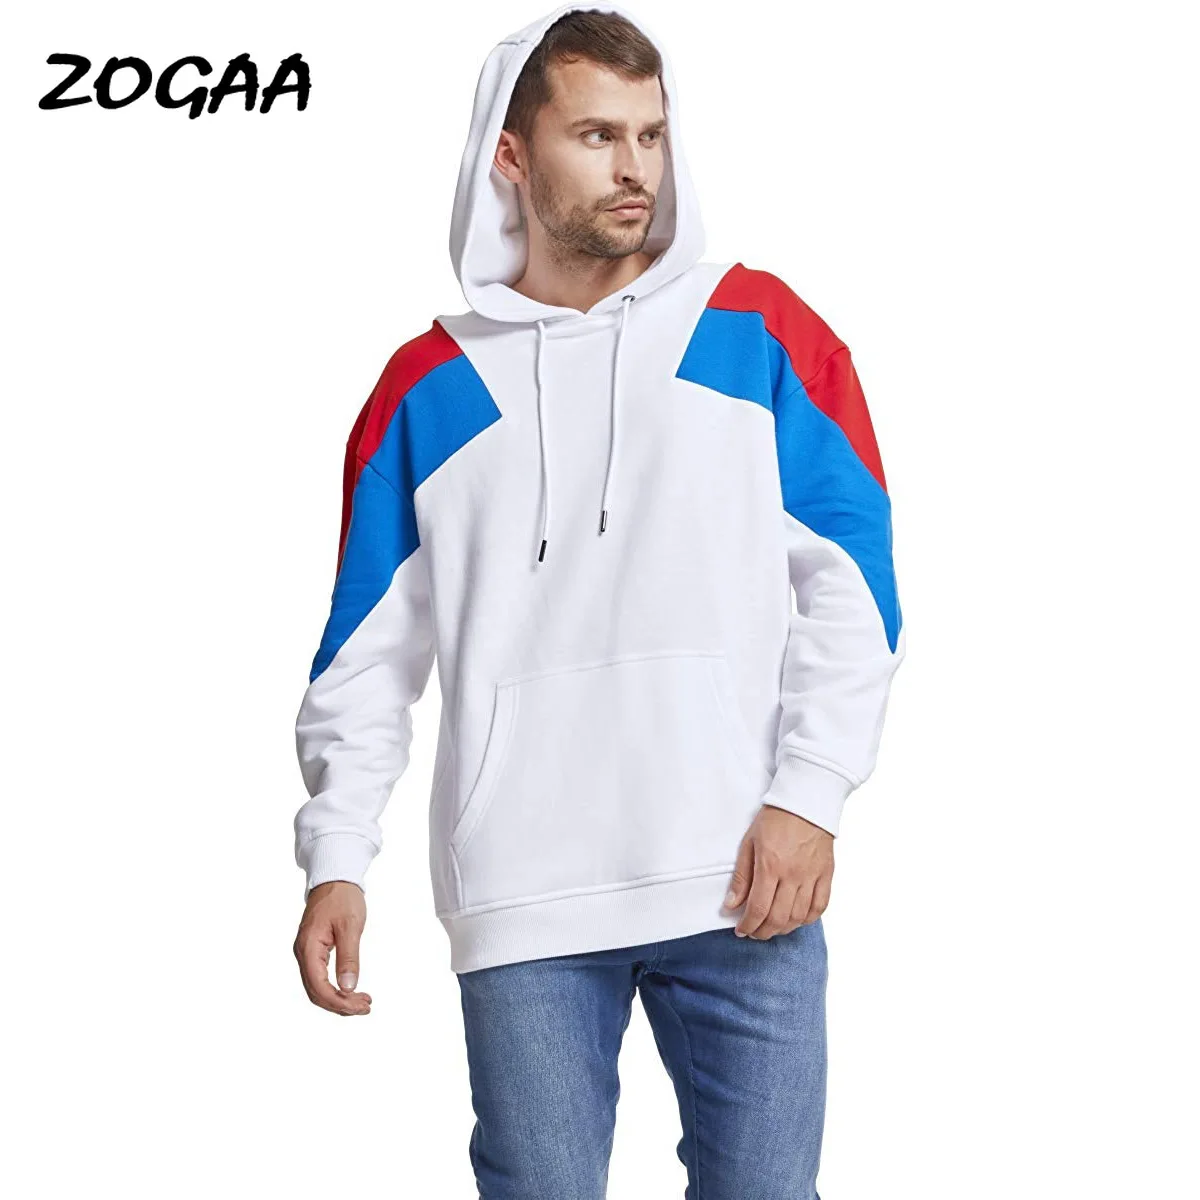 

ZOGAA Hoodies Men New Hooded Pullover Men's Fashion Stitching Casual Spring Autumn Youth Harajuku Sweatshirt Large Size Hot Chic